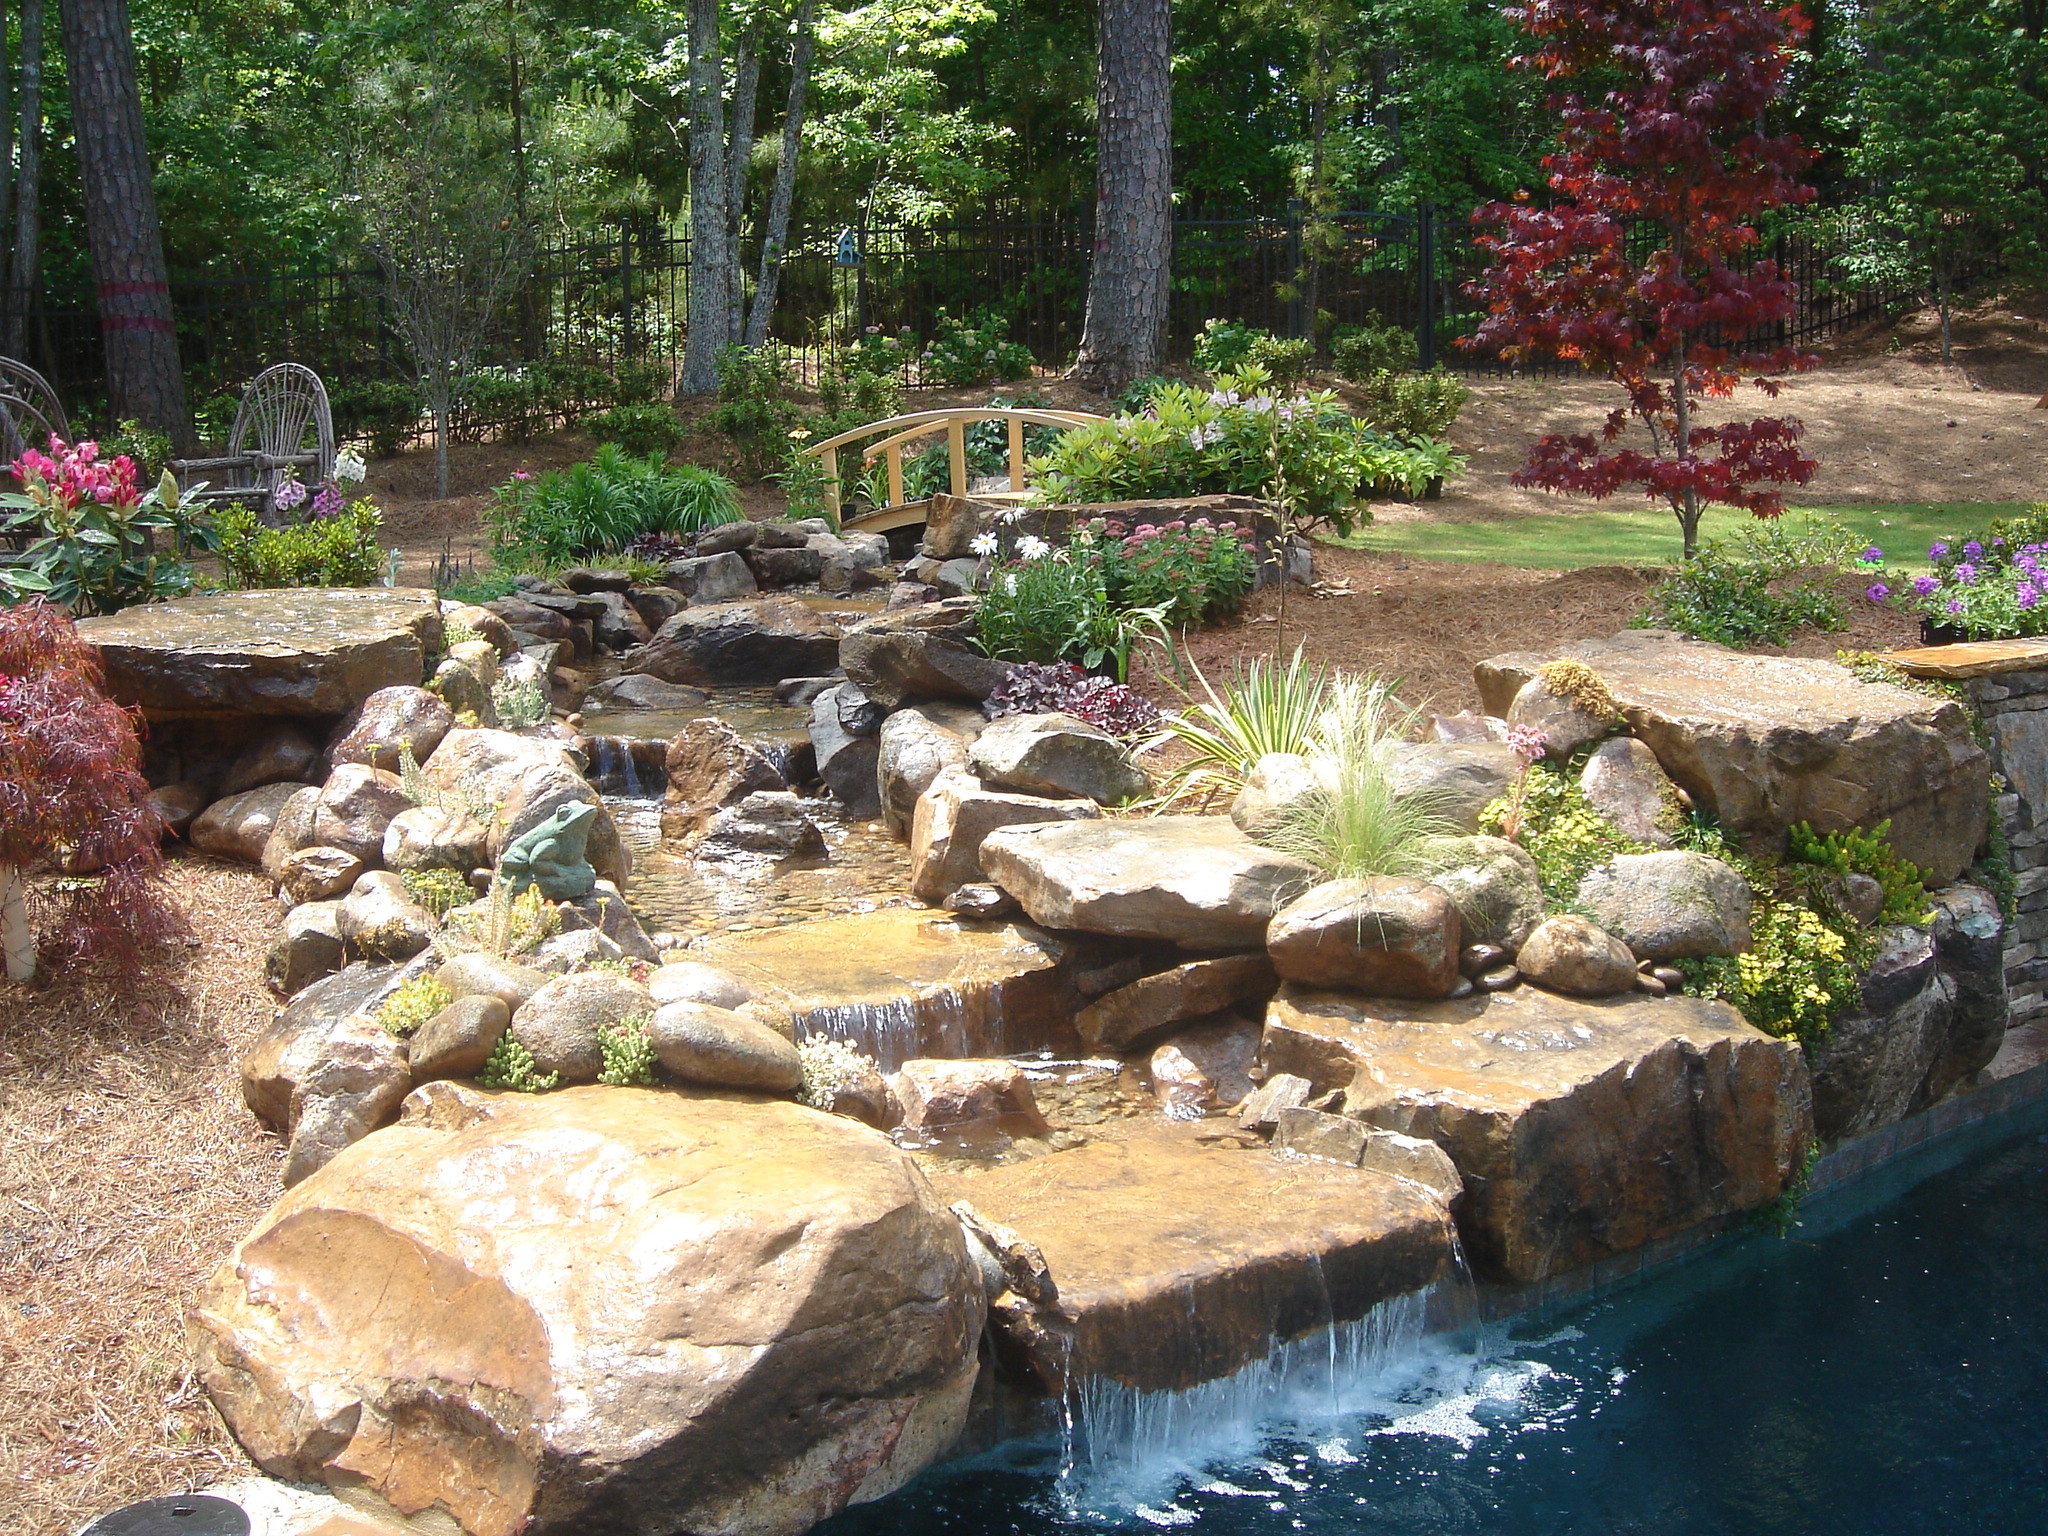 A stunning view of a custom three-tier boulder waterfall pool surrounded by lush greenery.